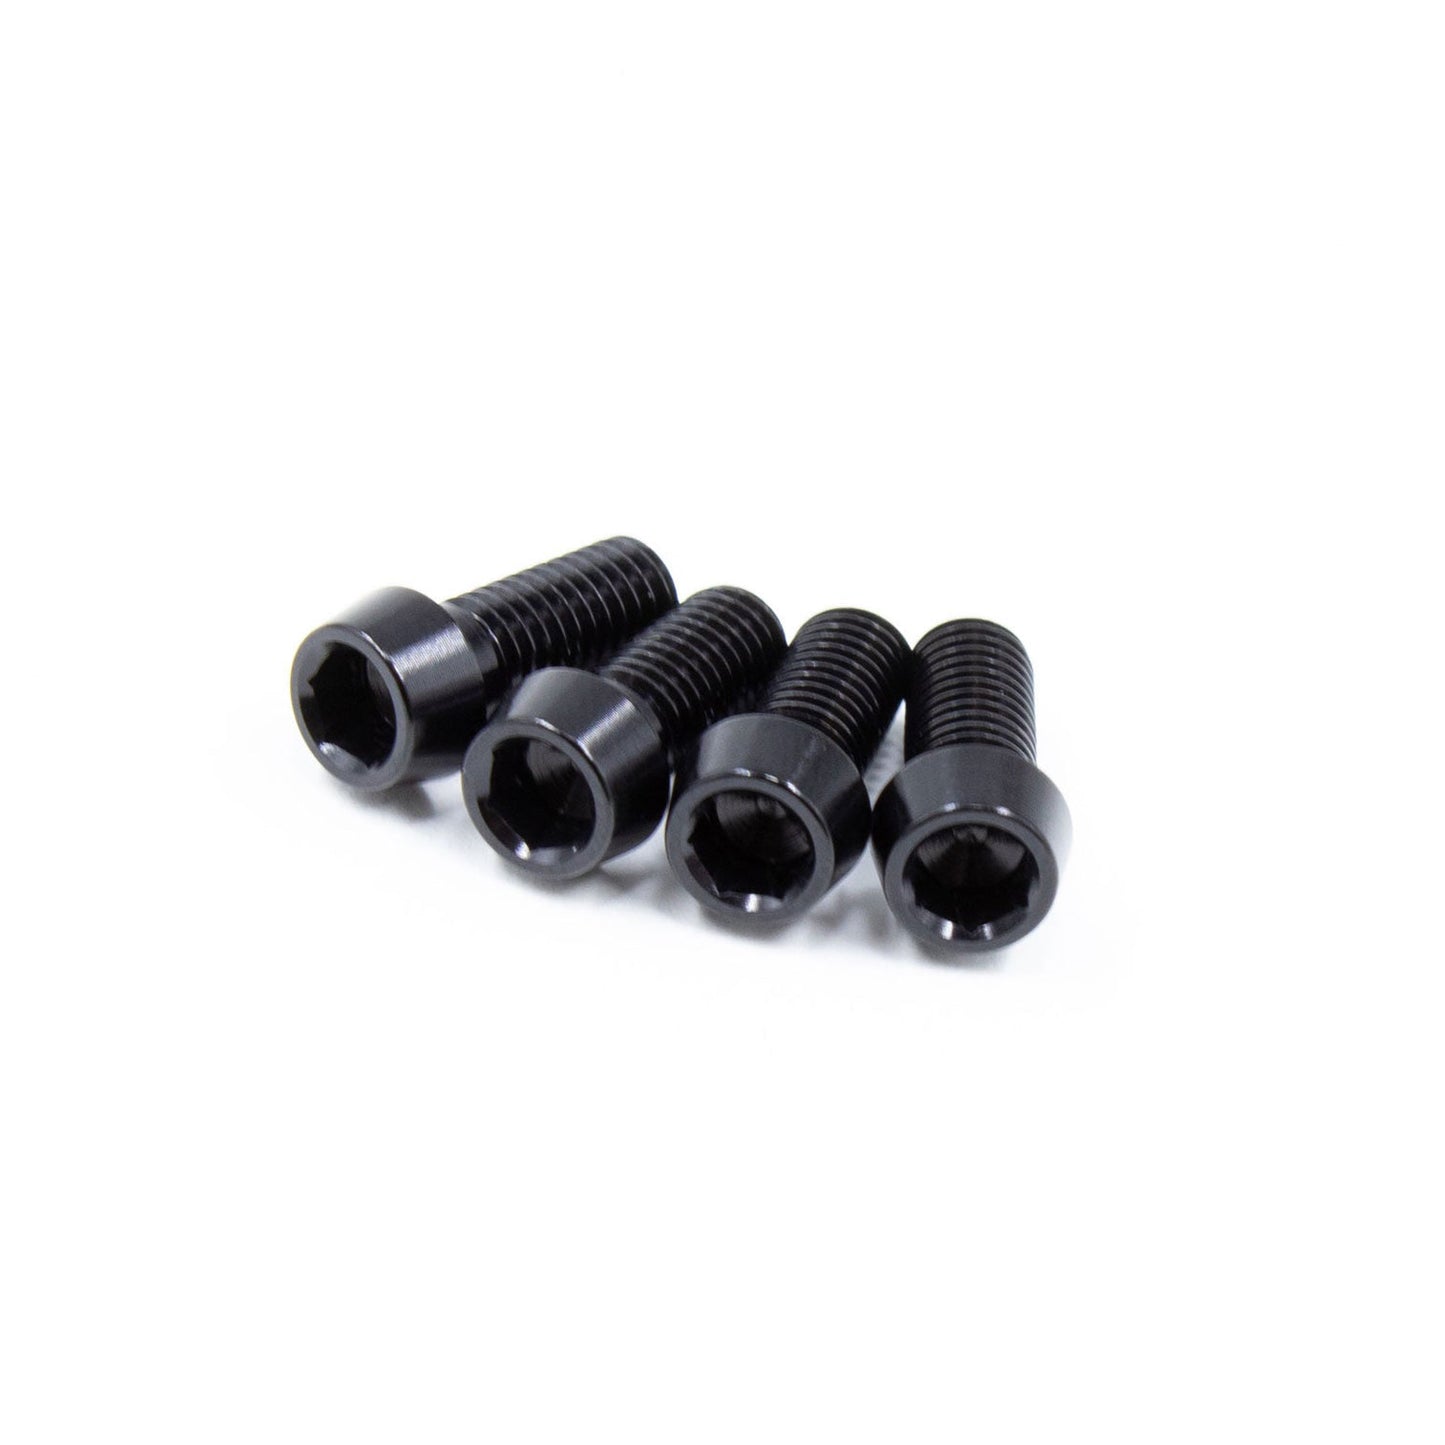 Black, ultra lightweight set of bolts for bicycle bottle cages